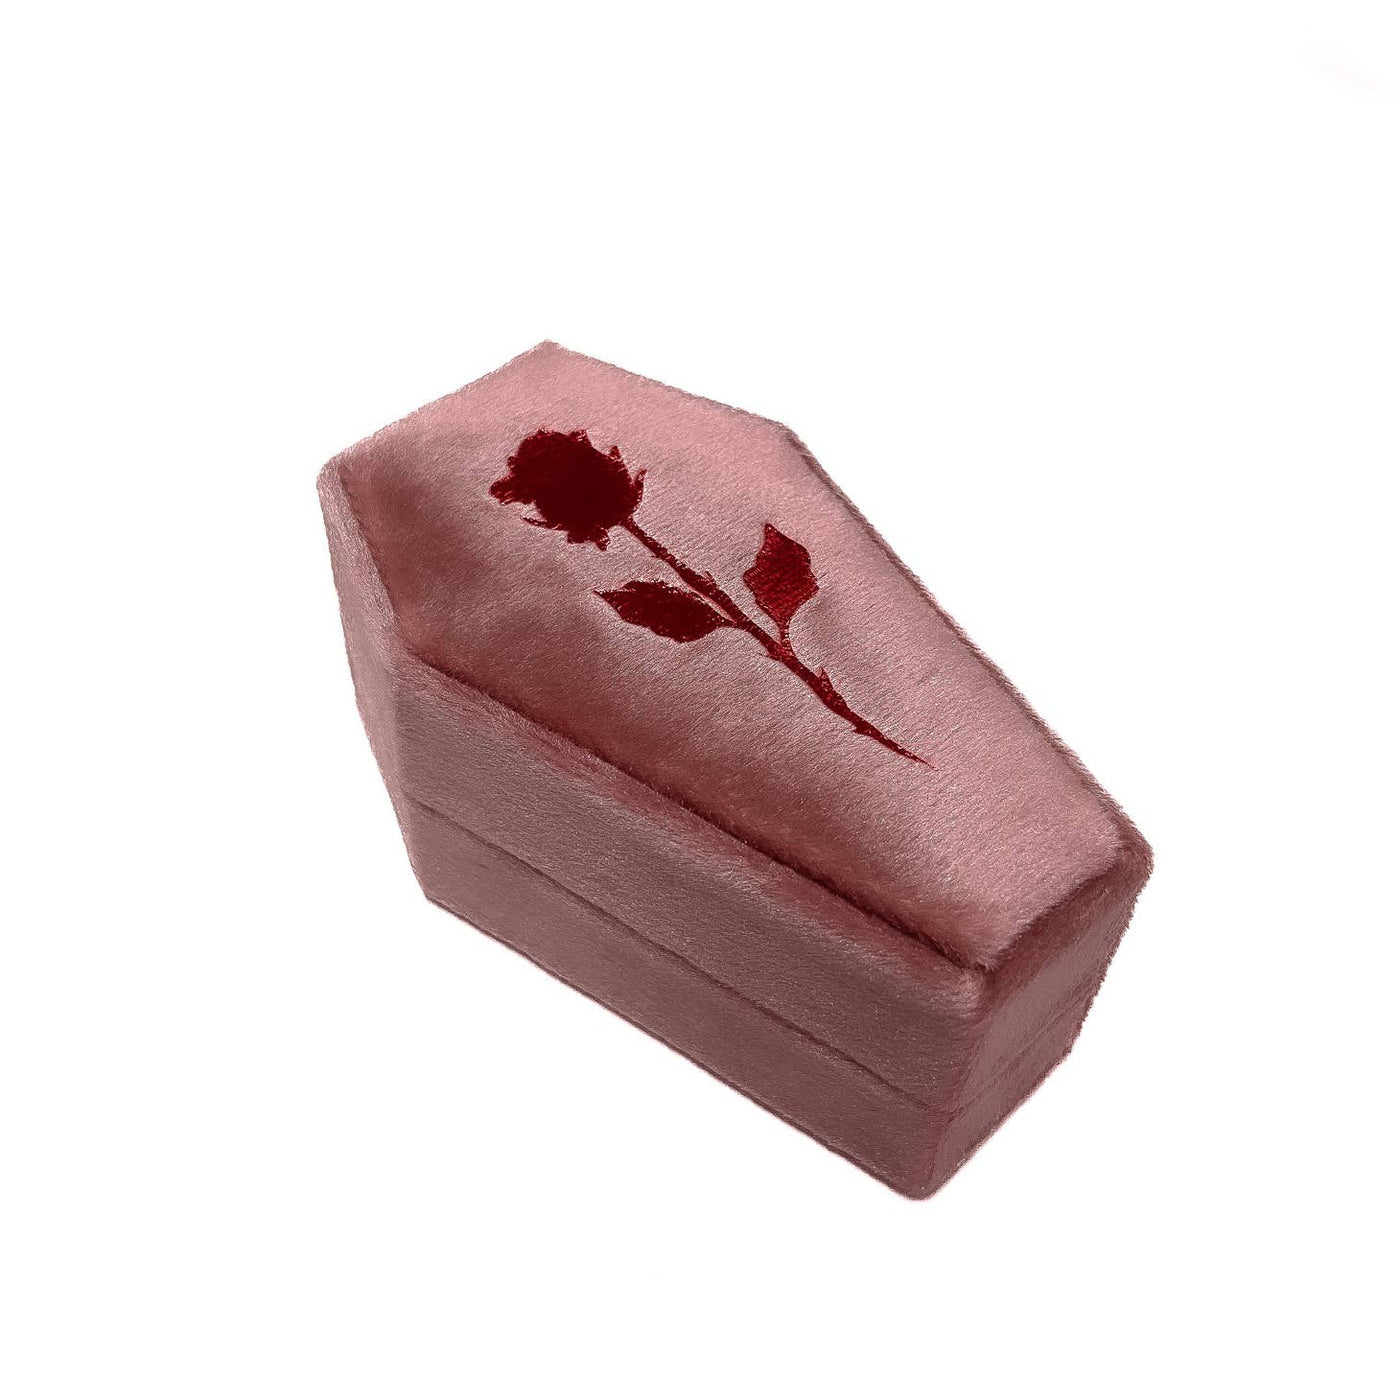 Lovers Rose Coffin Ring Box